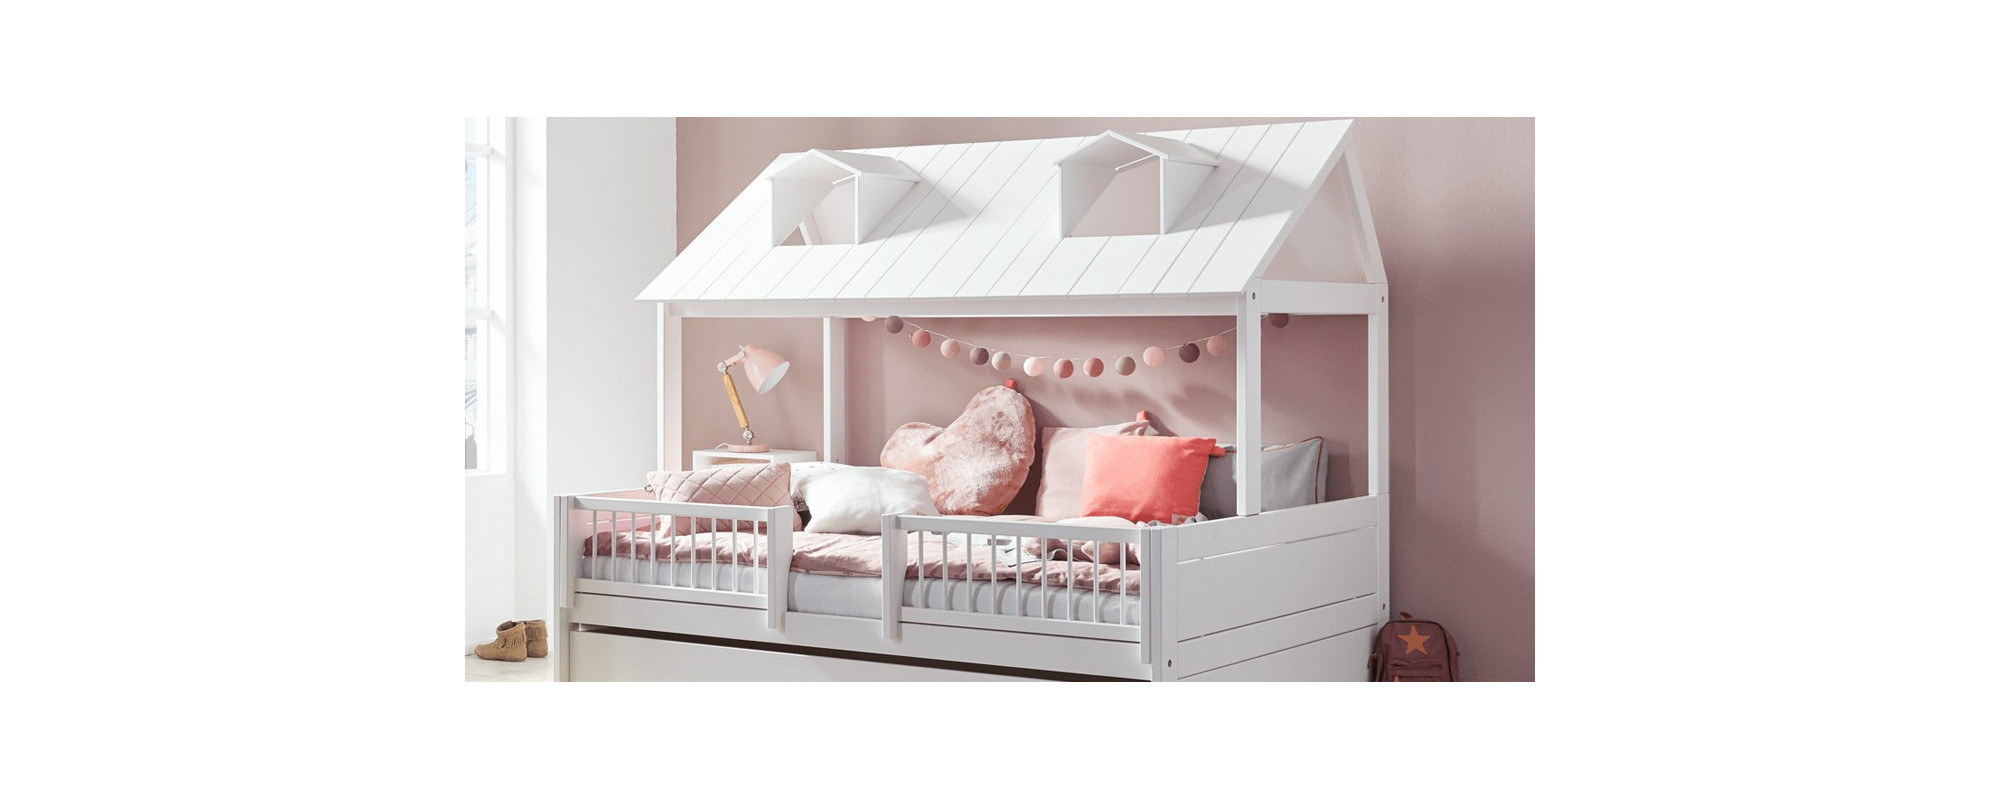 Life-Time BEACH-HOUSE – the sleeping pearl in every children's room!